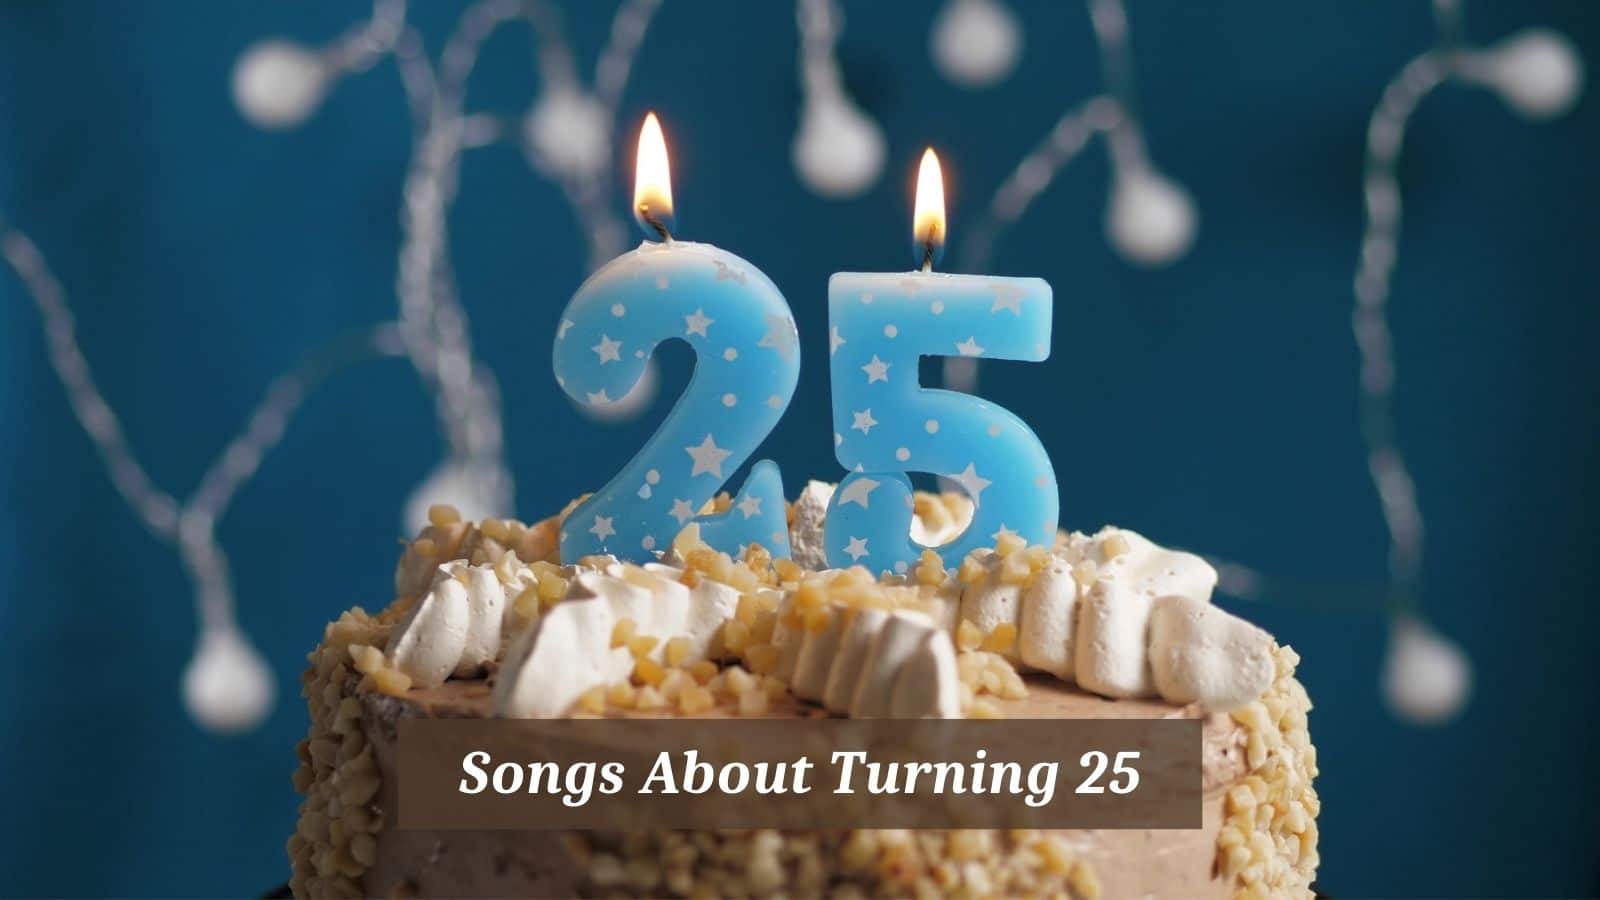 Songs About Turning 25